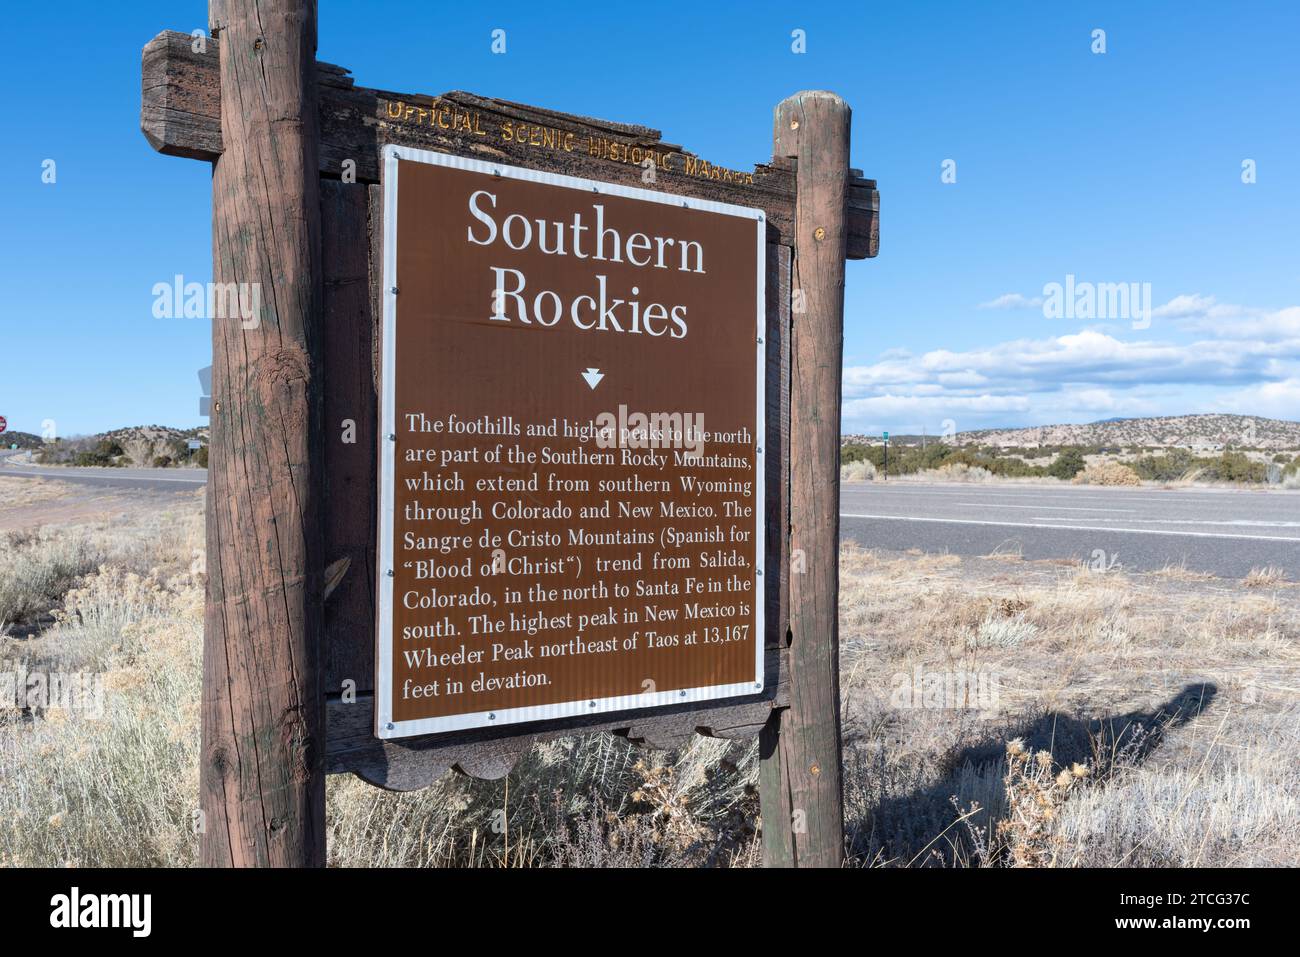 Historical marker for Southern Rockies at intersection of U.S. 285 and Old Lamy Trail, New Mexico, United States. Stock Photo